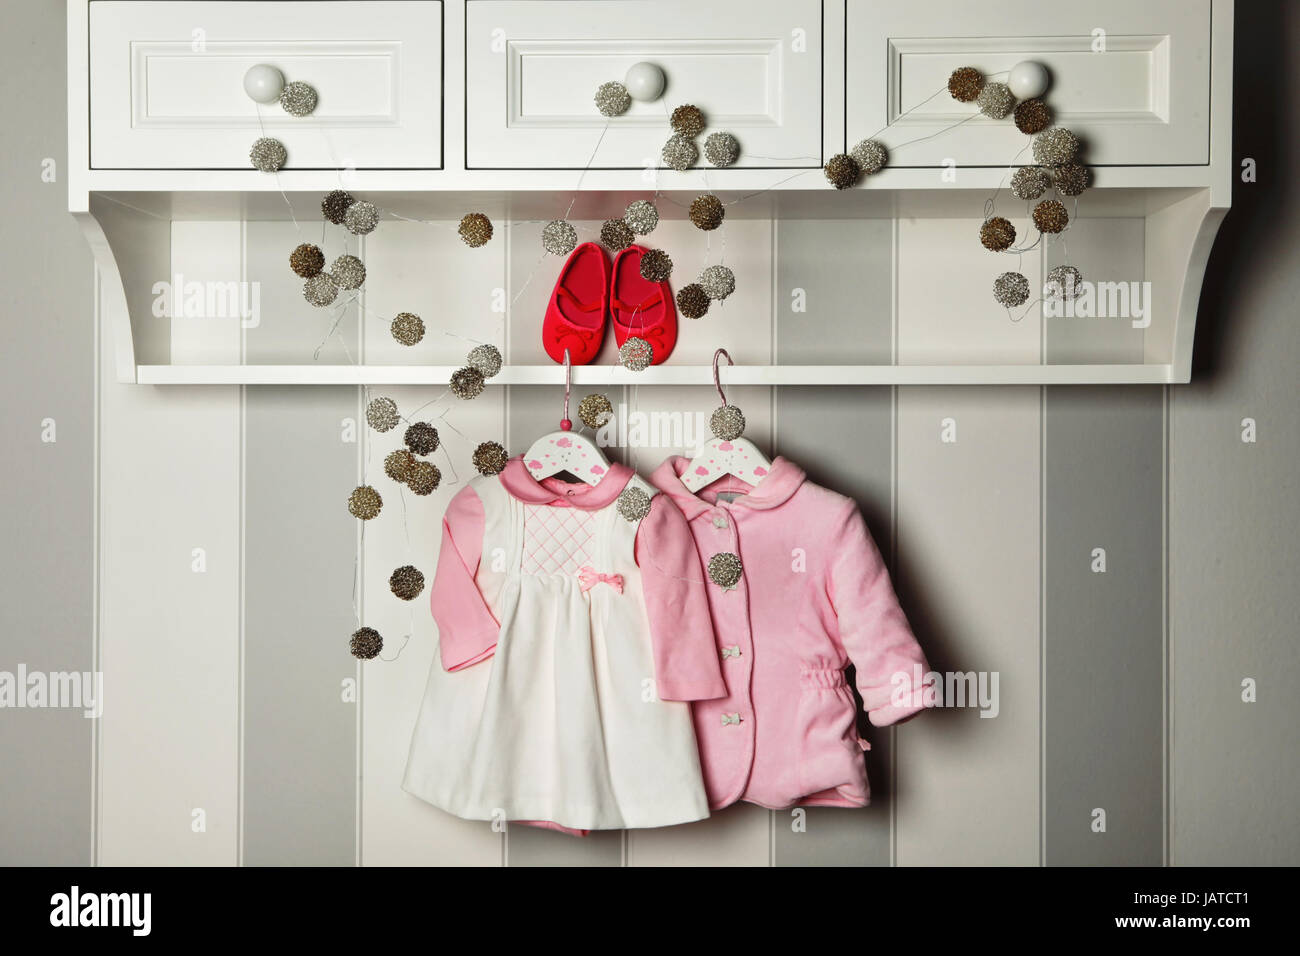 Baby clothes, concept of child fashion. Flat lay children's